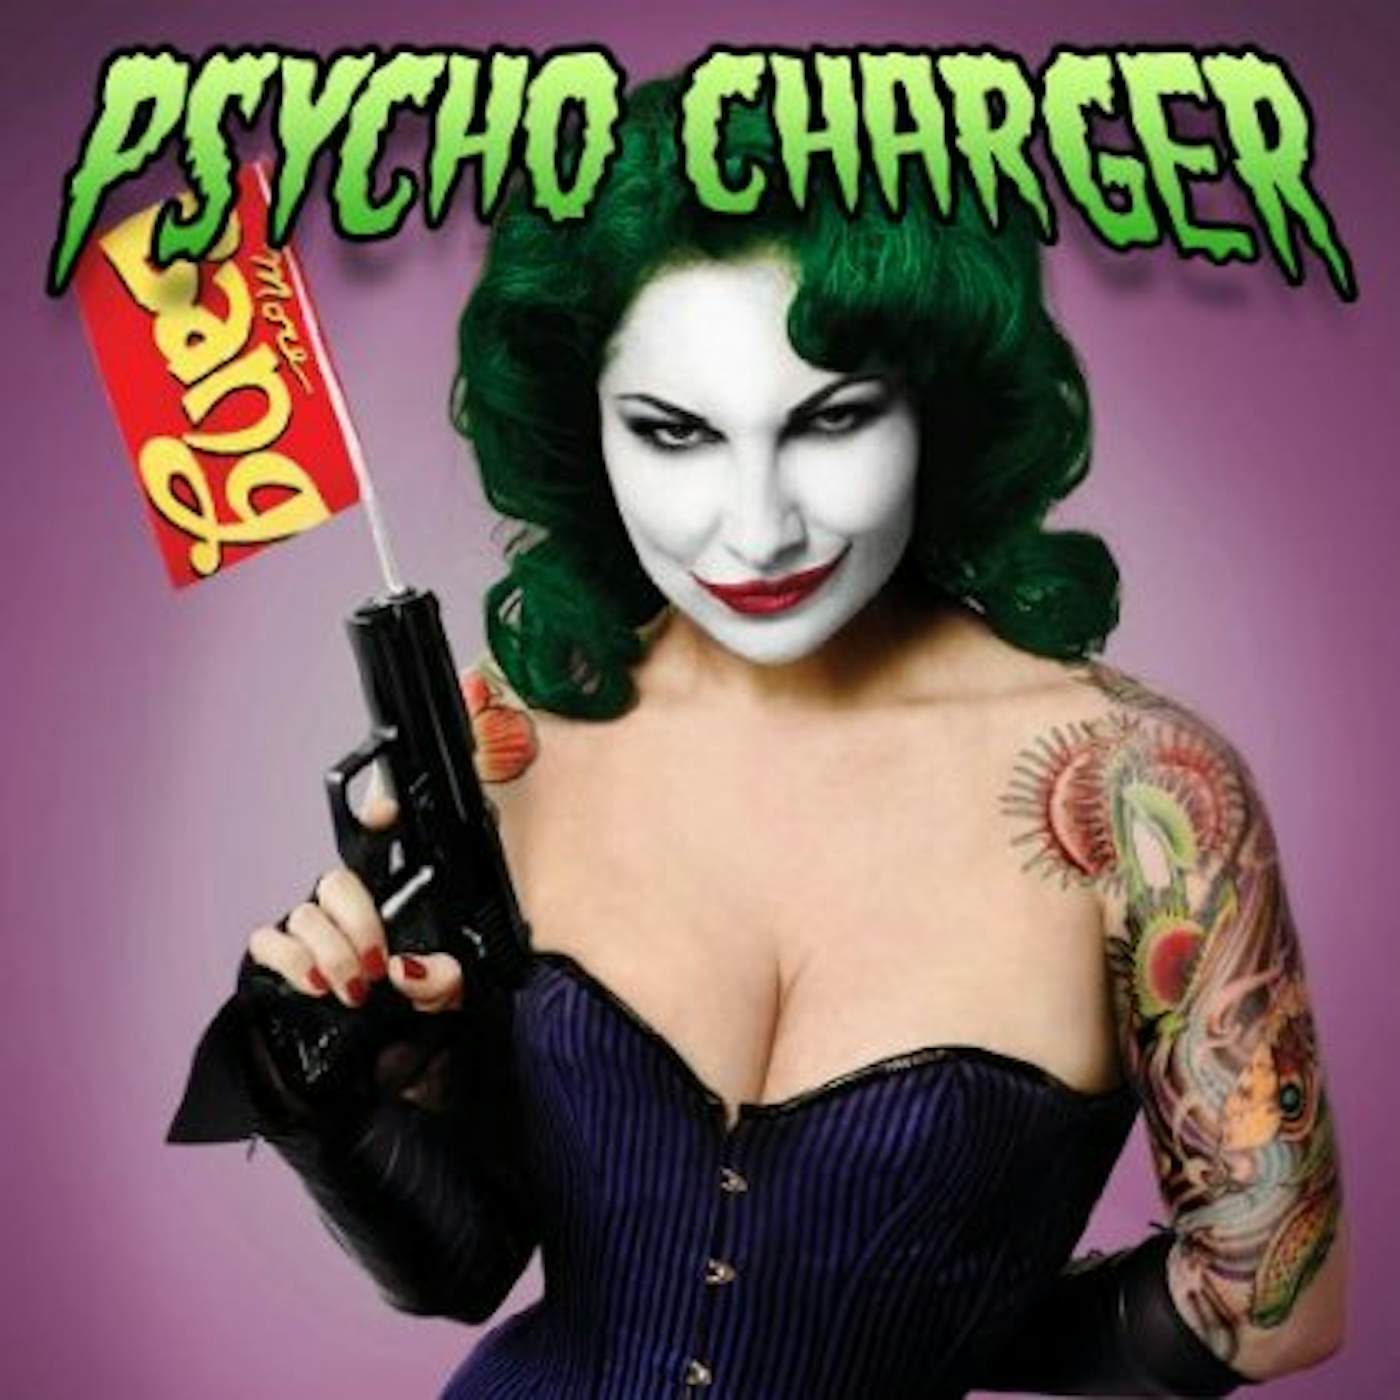 Psycho Charger I KISSED THE JOKER Vinyl Record